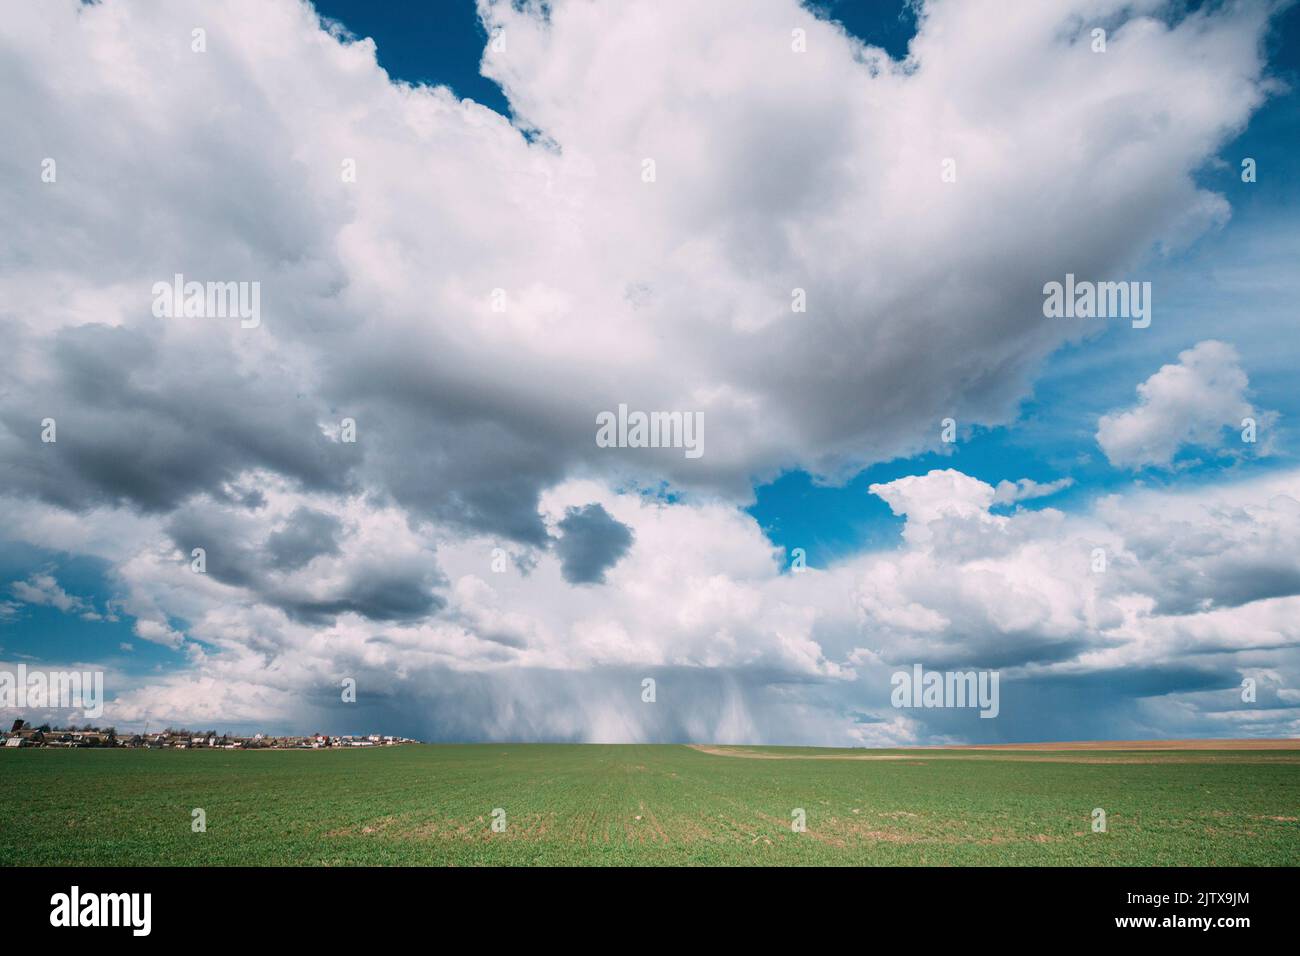 Sky During Rain Horizon Above Rural Landscape Field. Agricultural And Weather Forecast Concept. Storm, Thunder, thunderstorm, stormclouds, Rainy Day, Stock Photo